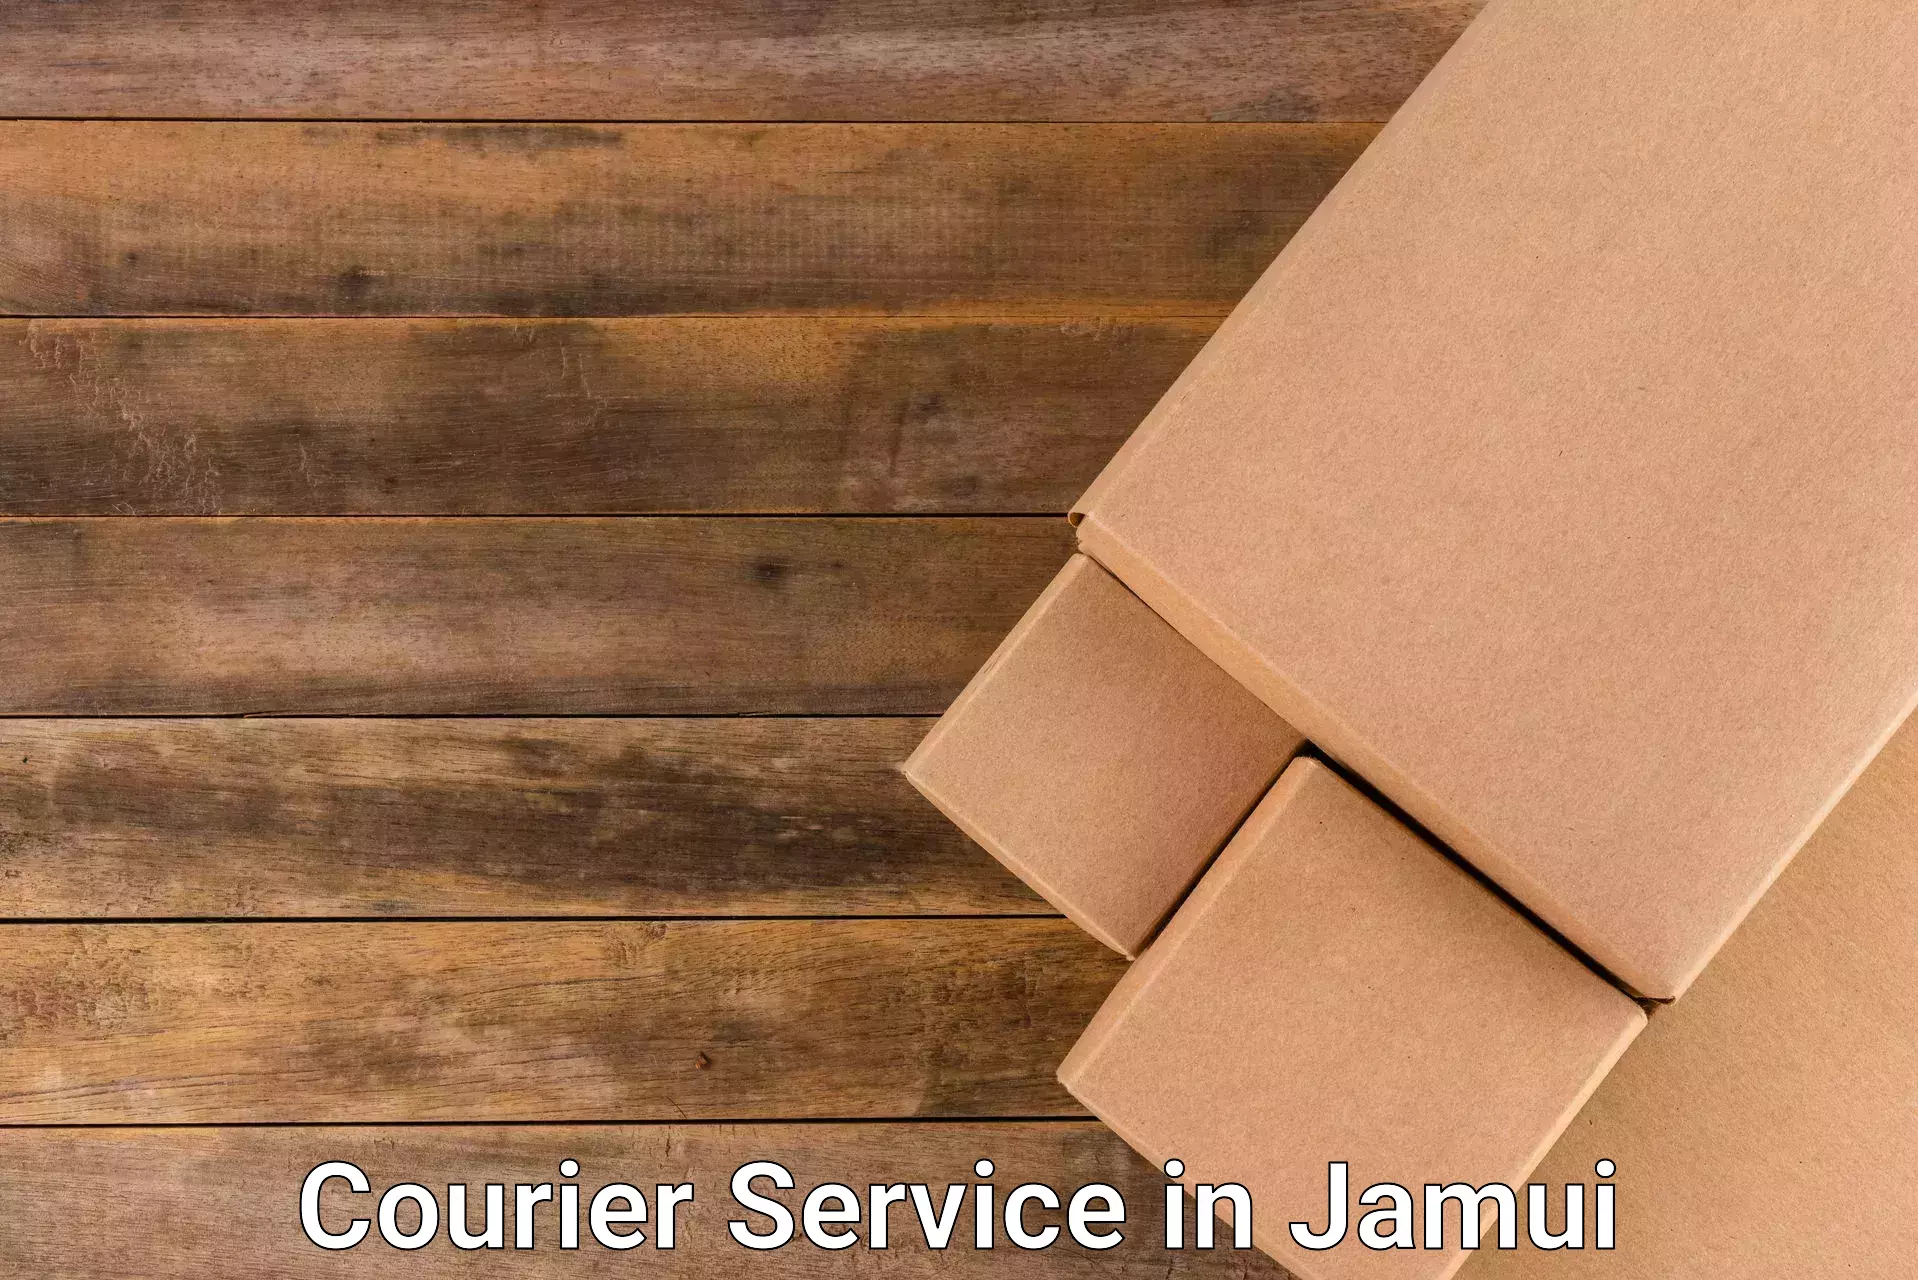 Emergency parcel delivery in Jamui